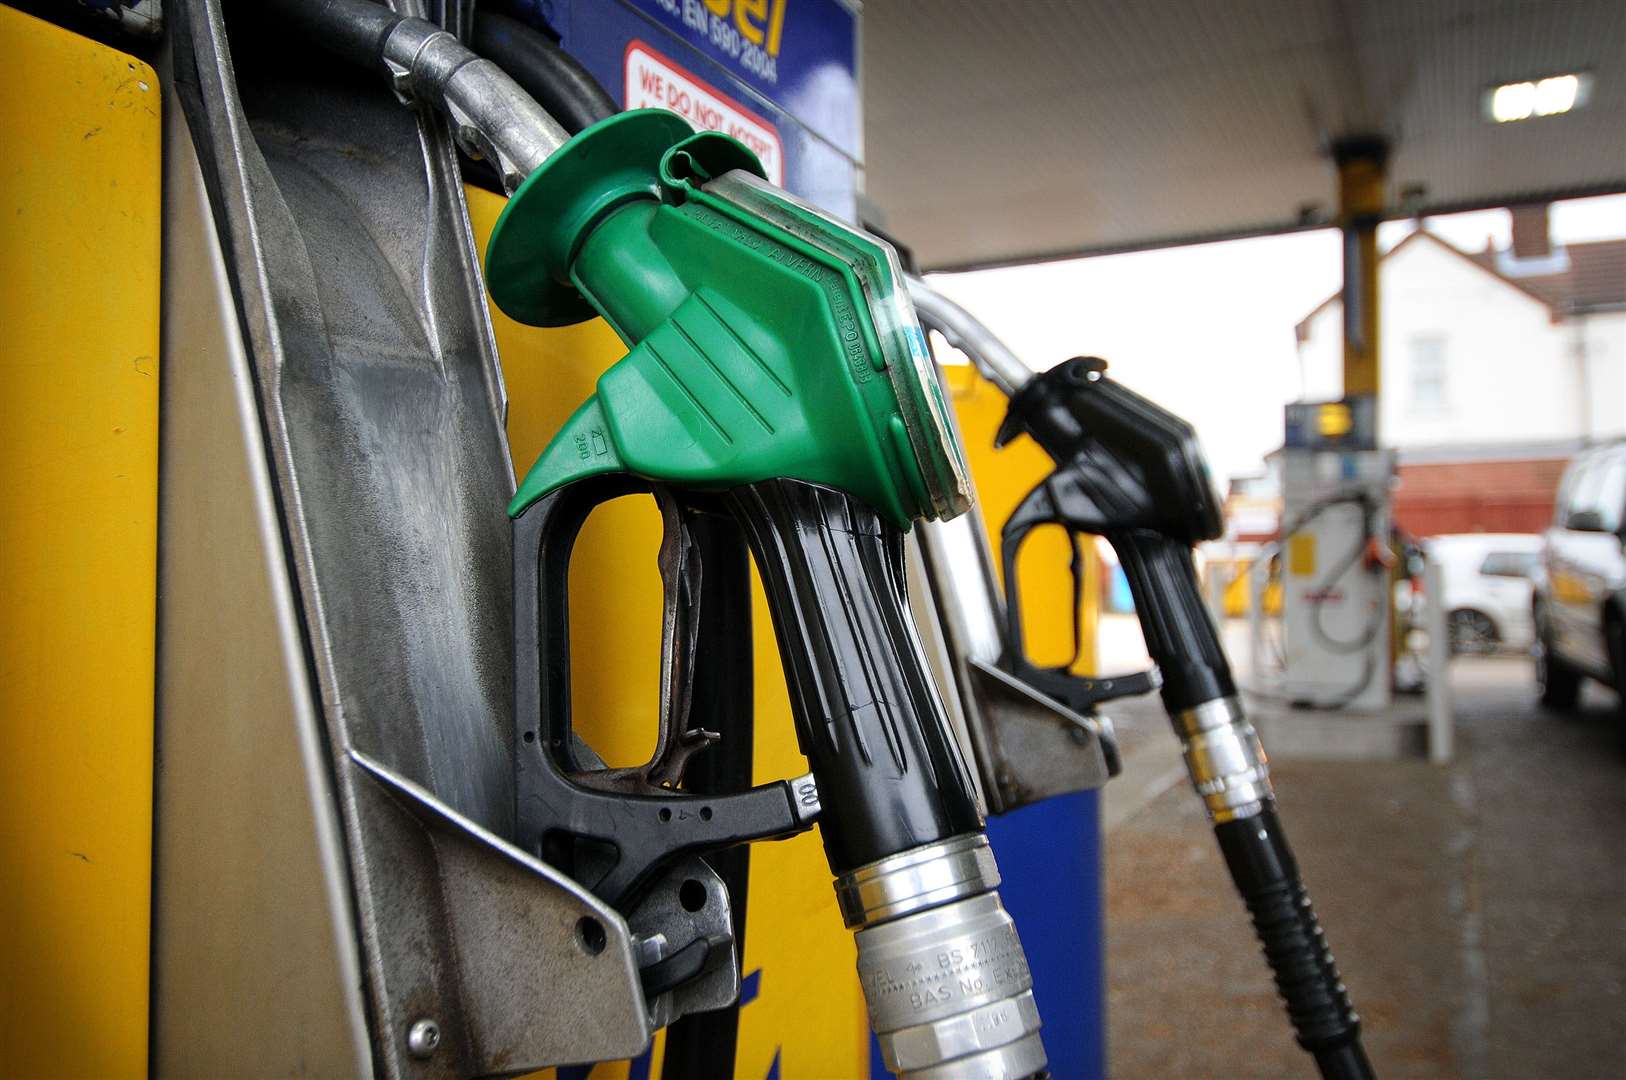 The RAC is concerned that not all drivers have checked which fuel their car is compatible with